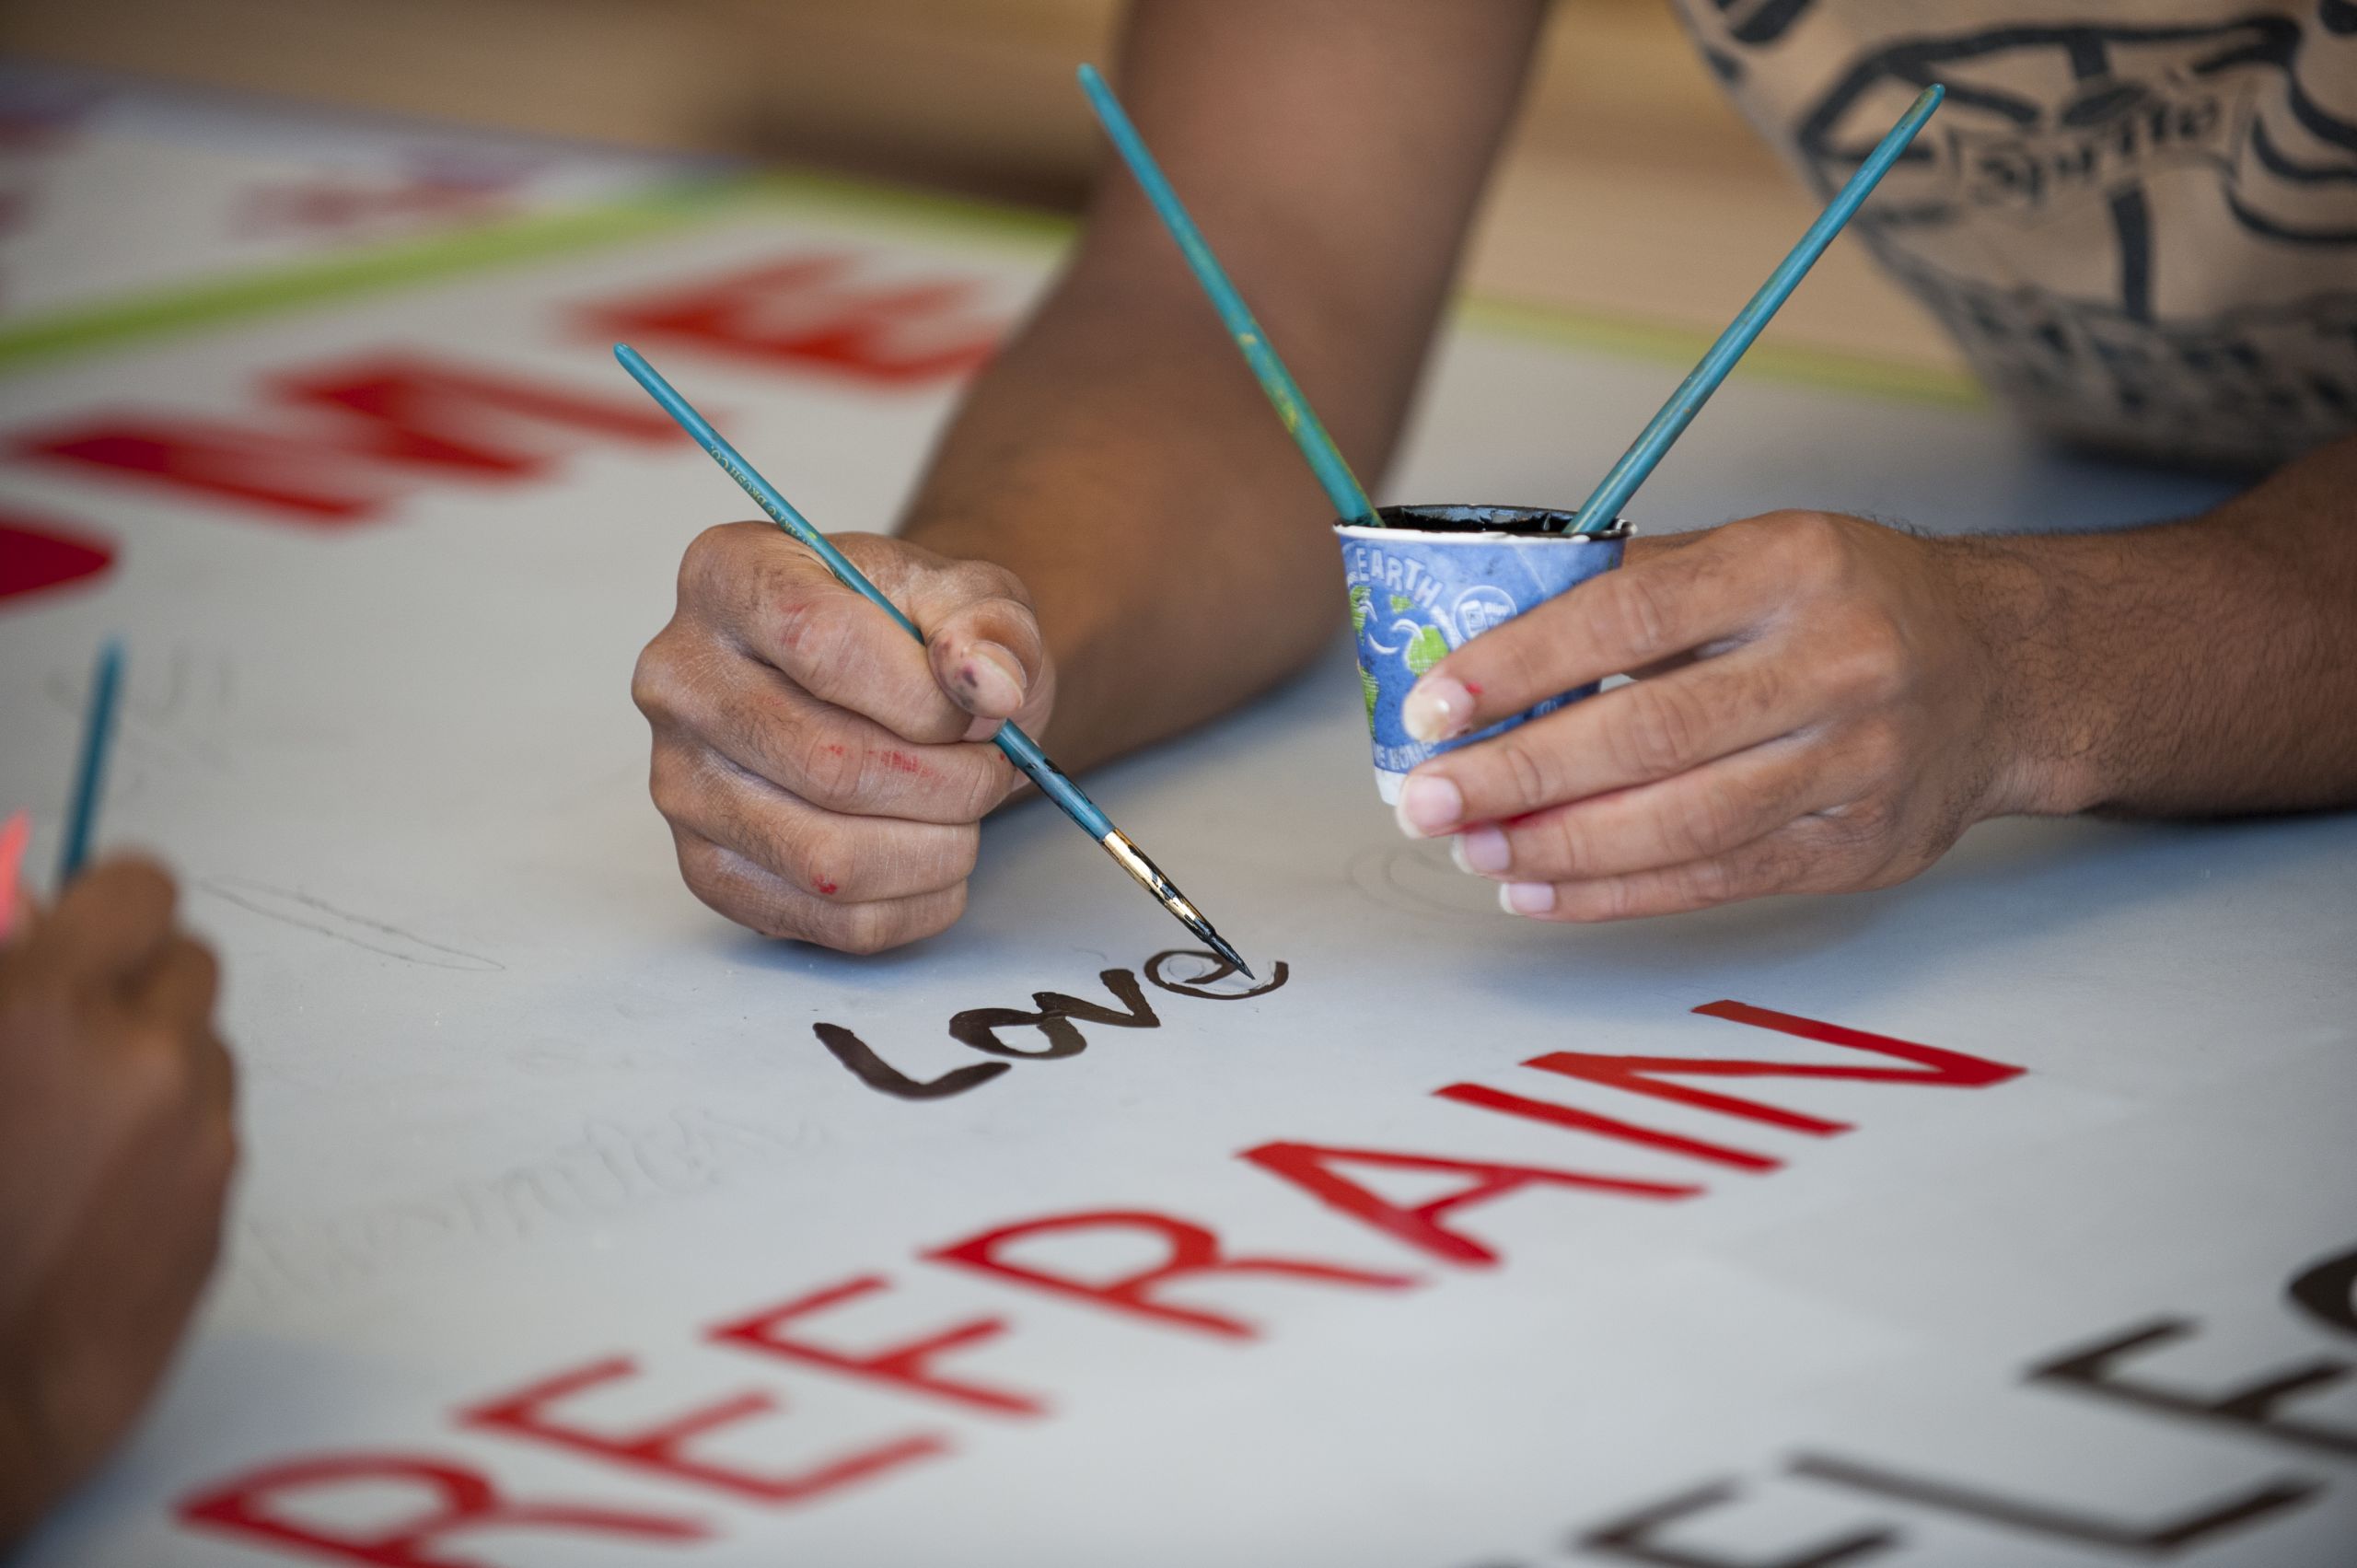 One hand holds a small paper cup of black paint, while the other paints the word "Love" on to a sign.